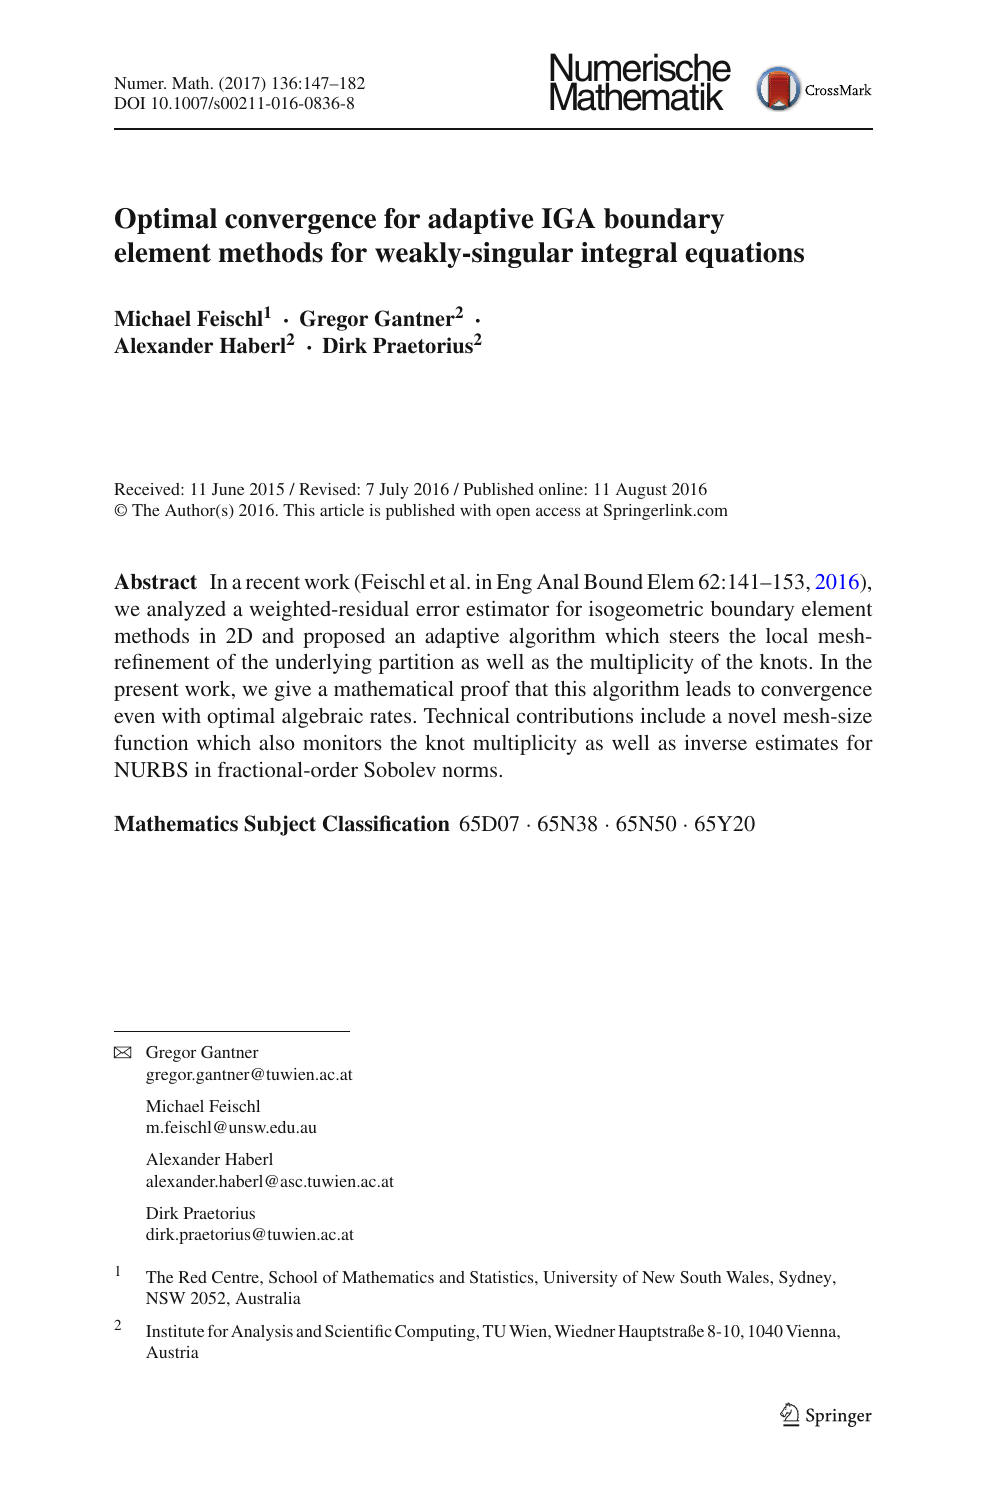 Optimal Convergence For Adaptive Iga Boundary Element Methods For Weakly Singular Integral Equations Topic Of Research Paper In Mathematics Download Scholarly Article Pdf And Read For Free On Cyberleninka Open Science Hub